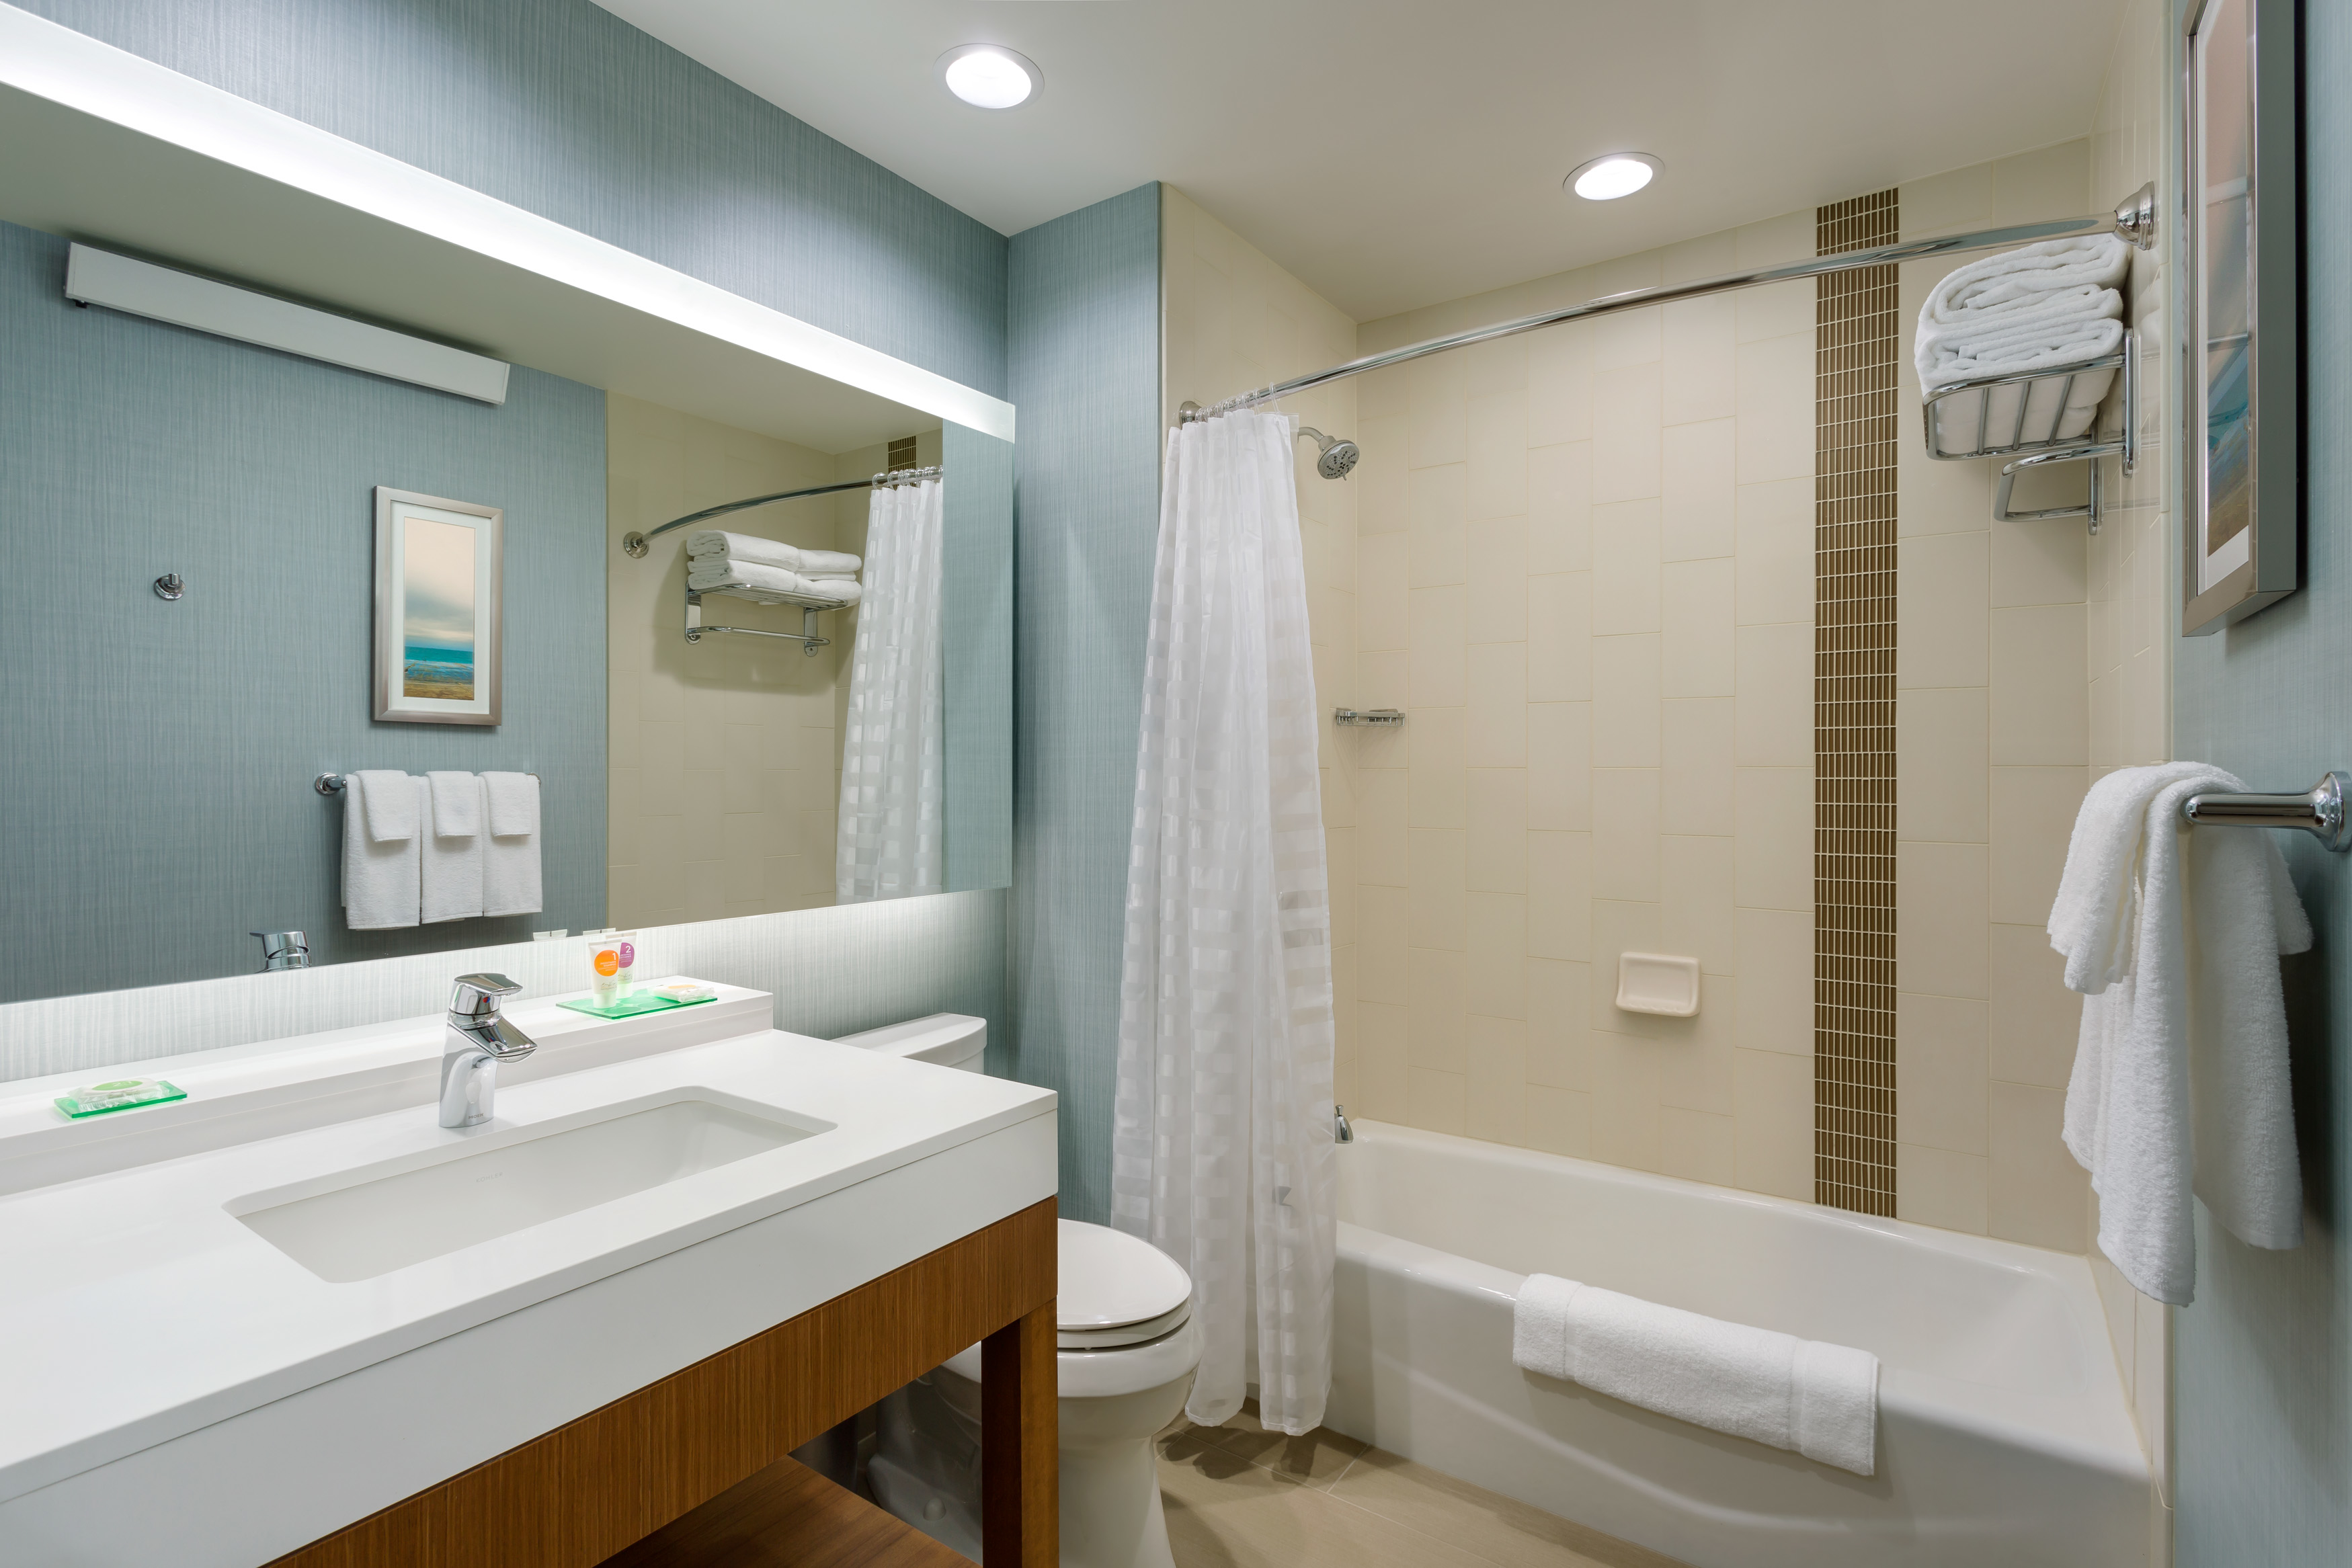 Our standard tub bathroom features deluxe bathroom amenities including shampoo, conditioner and a hair dryer.